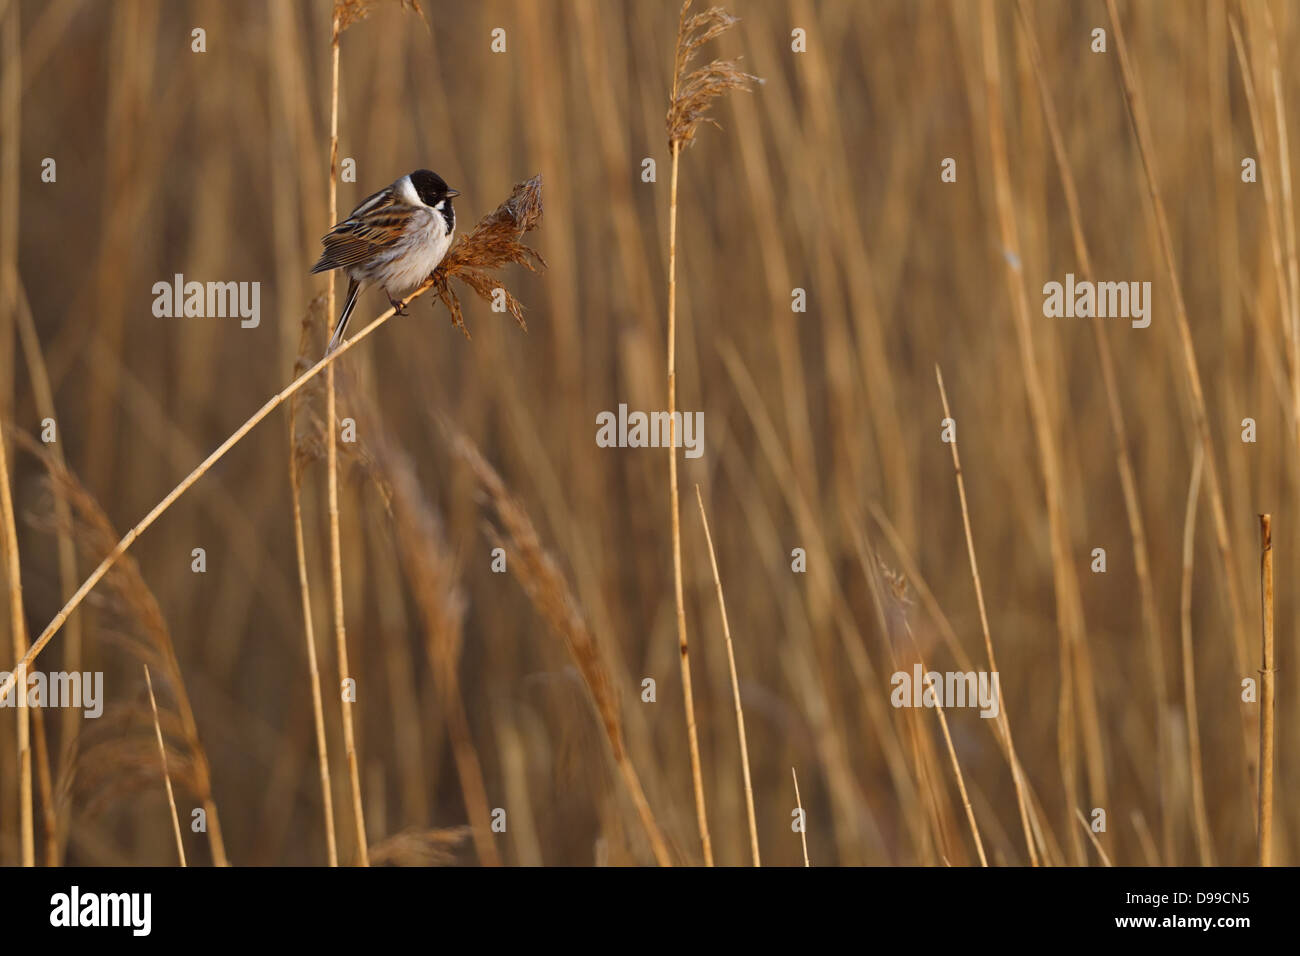 Rohrammer, Reed Bunting, Emberiza schoeniclus, Bruant des roseaux, Escribano Palustre Stock Photo